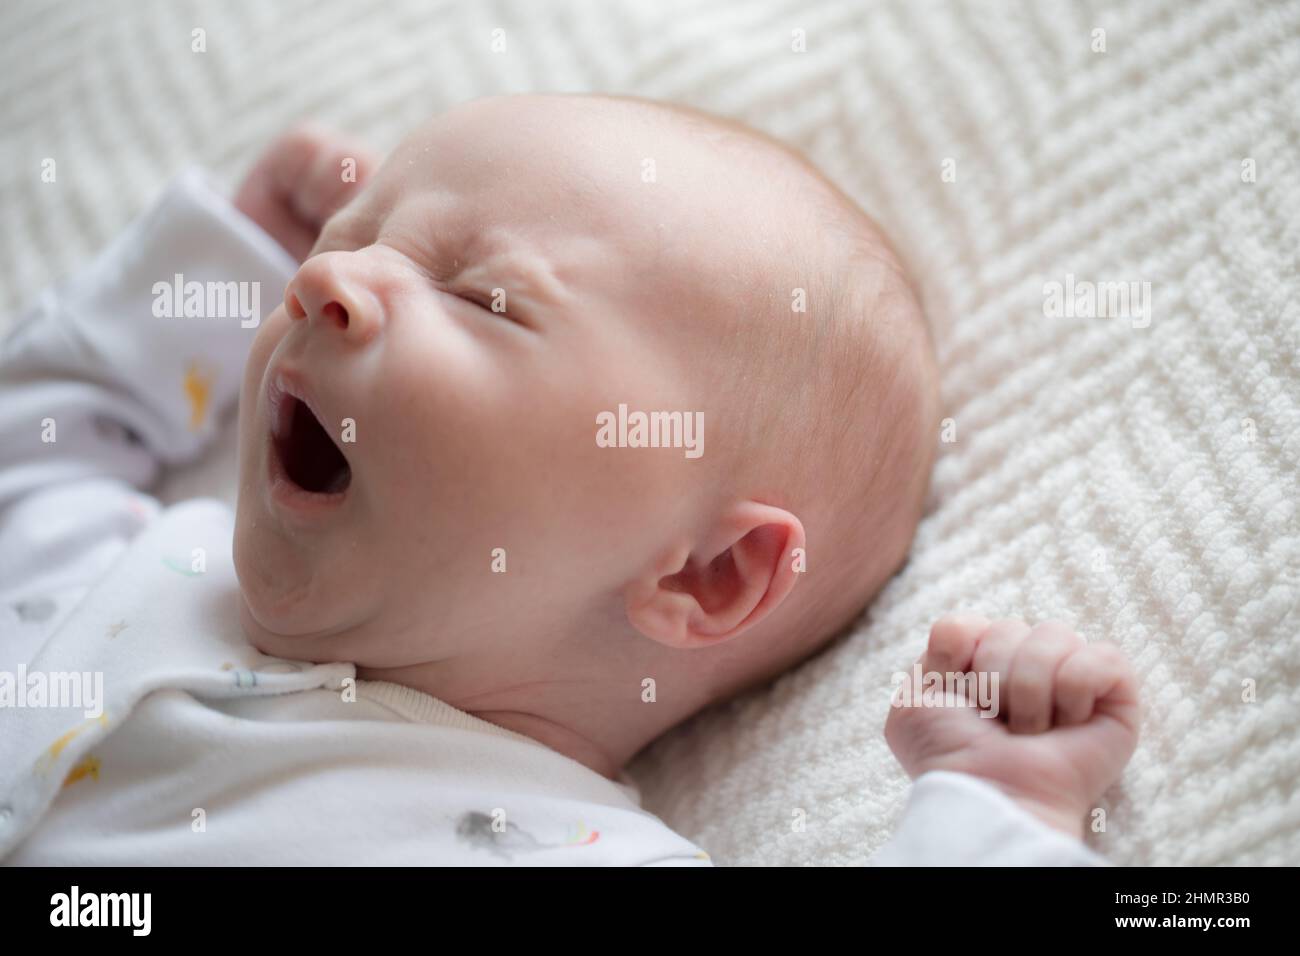 A young baby asleep. Stock Photo